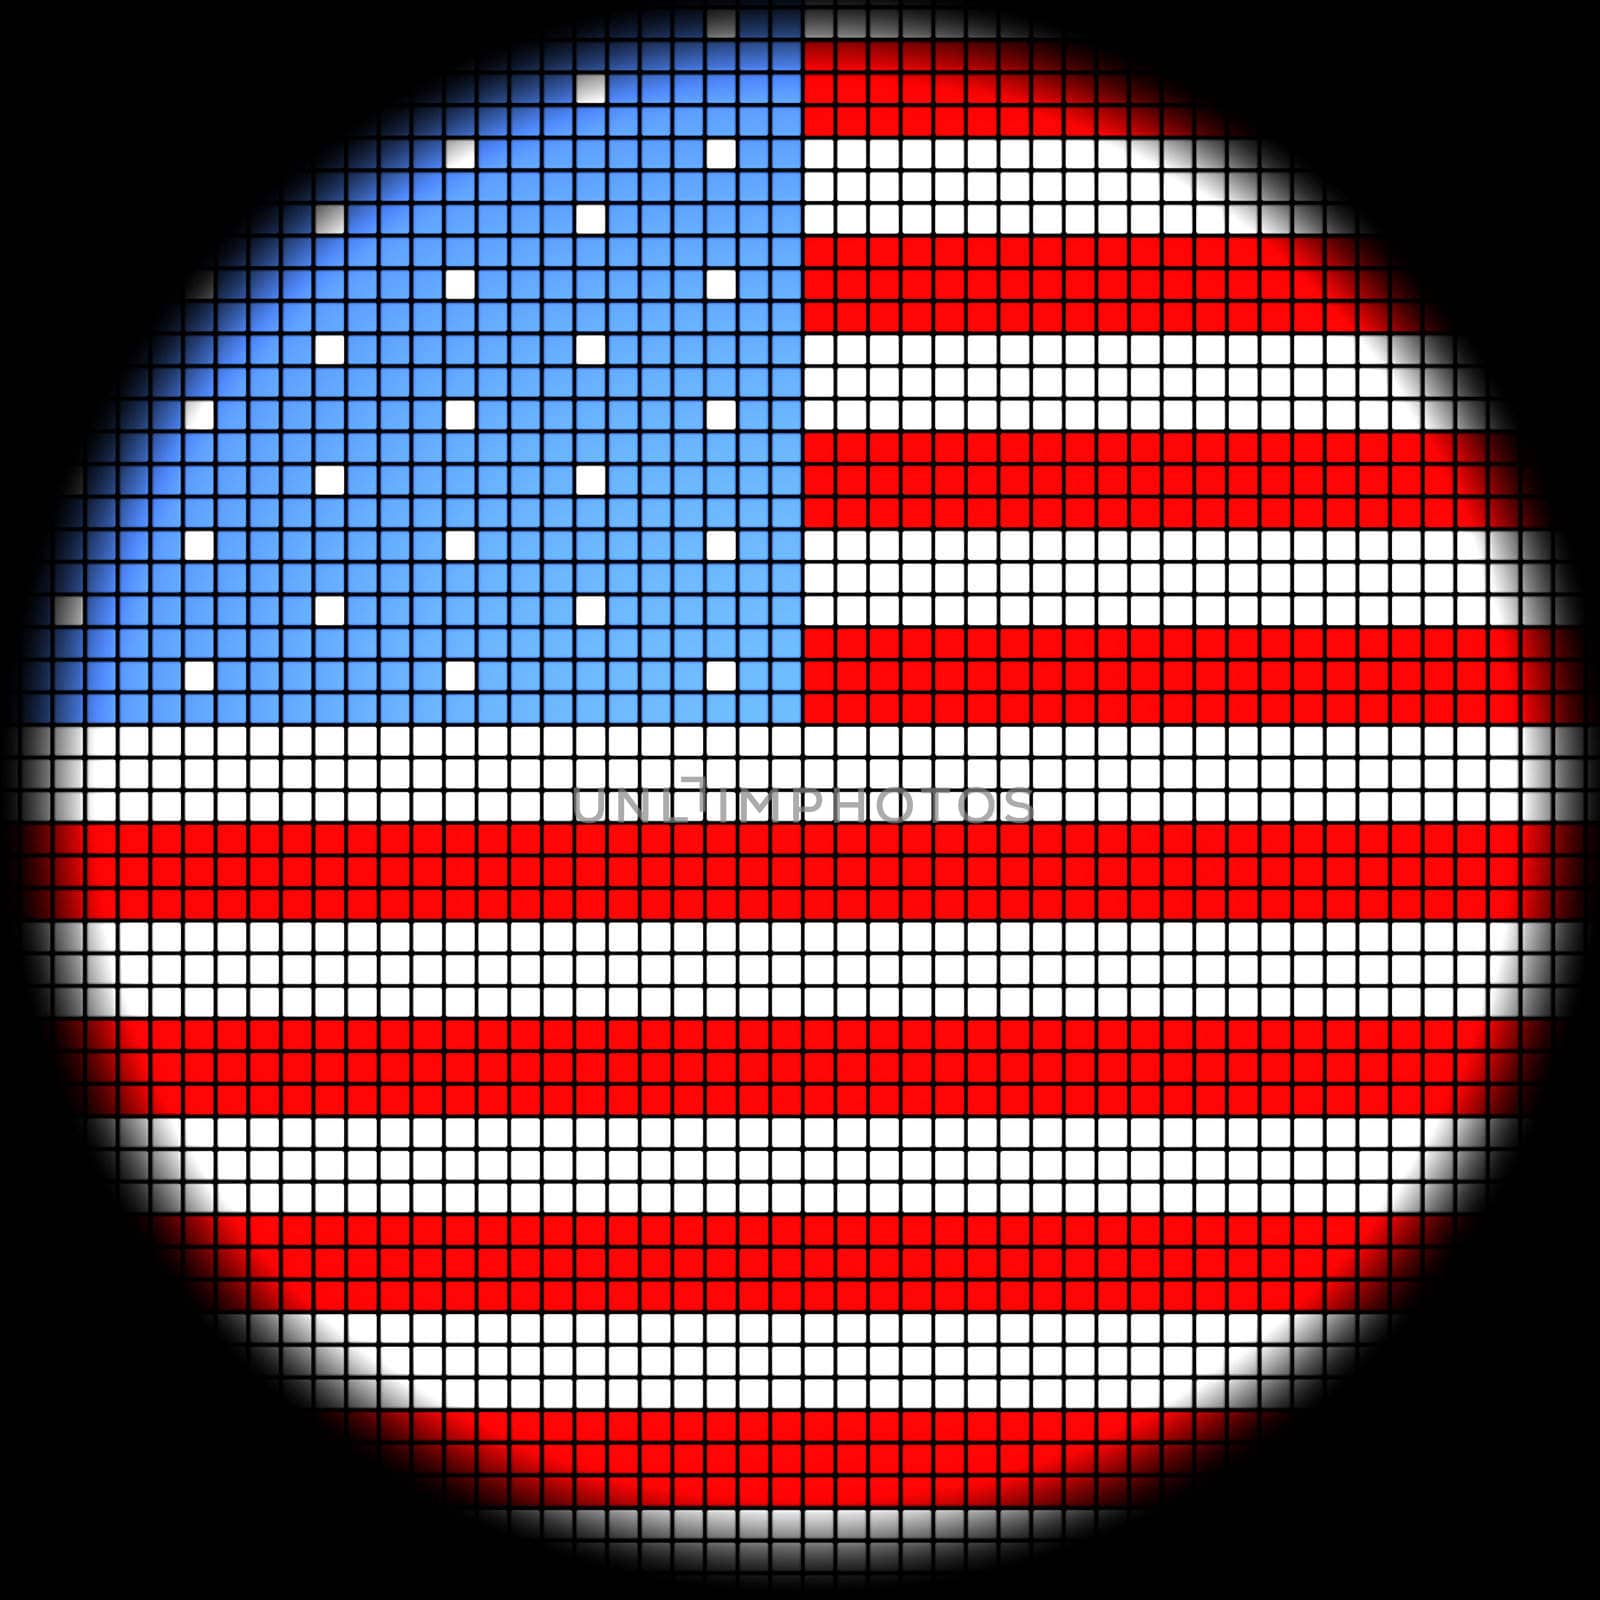 American Flag by gkuna